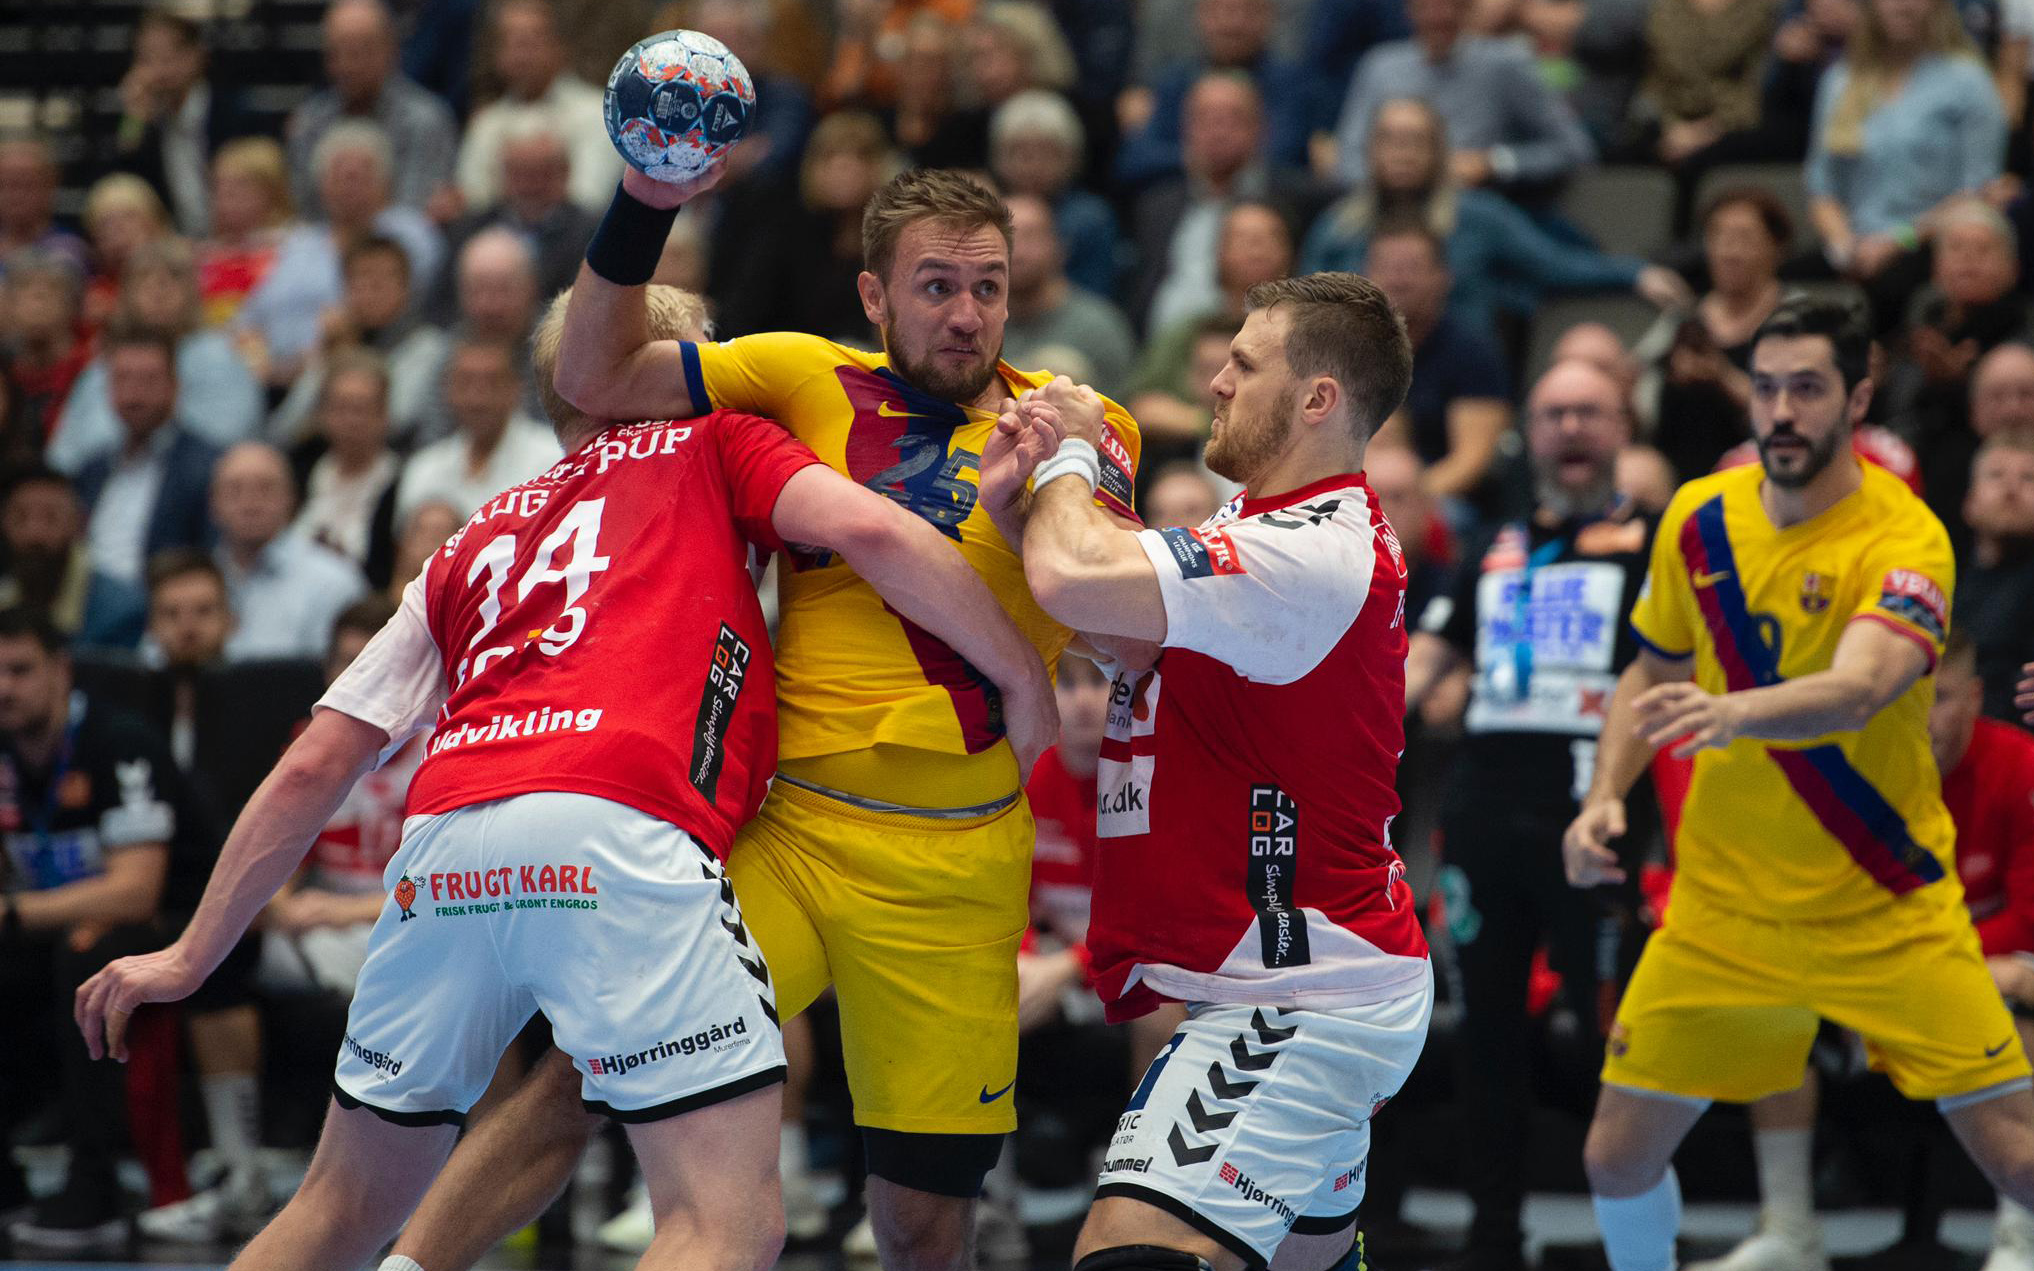 Aalborg 30-34 Barça: A win to retain the